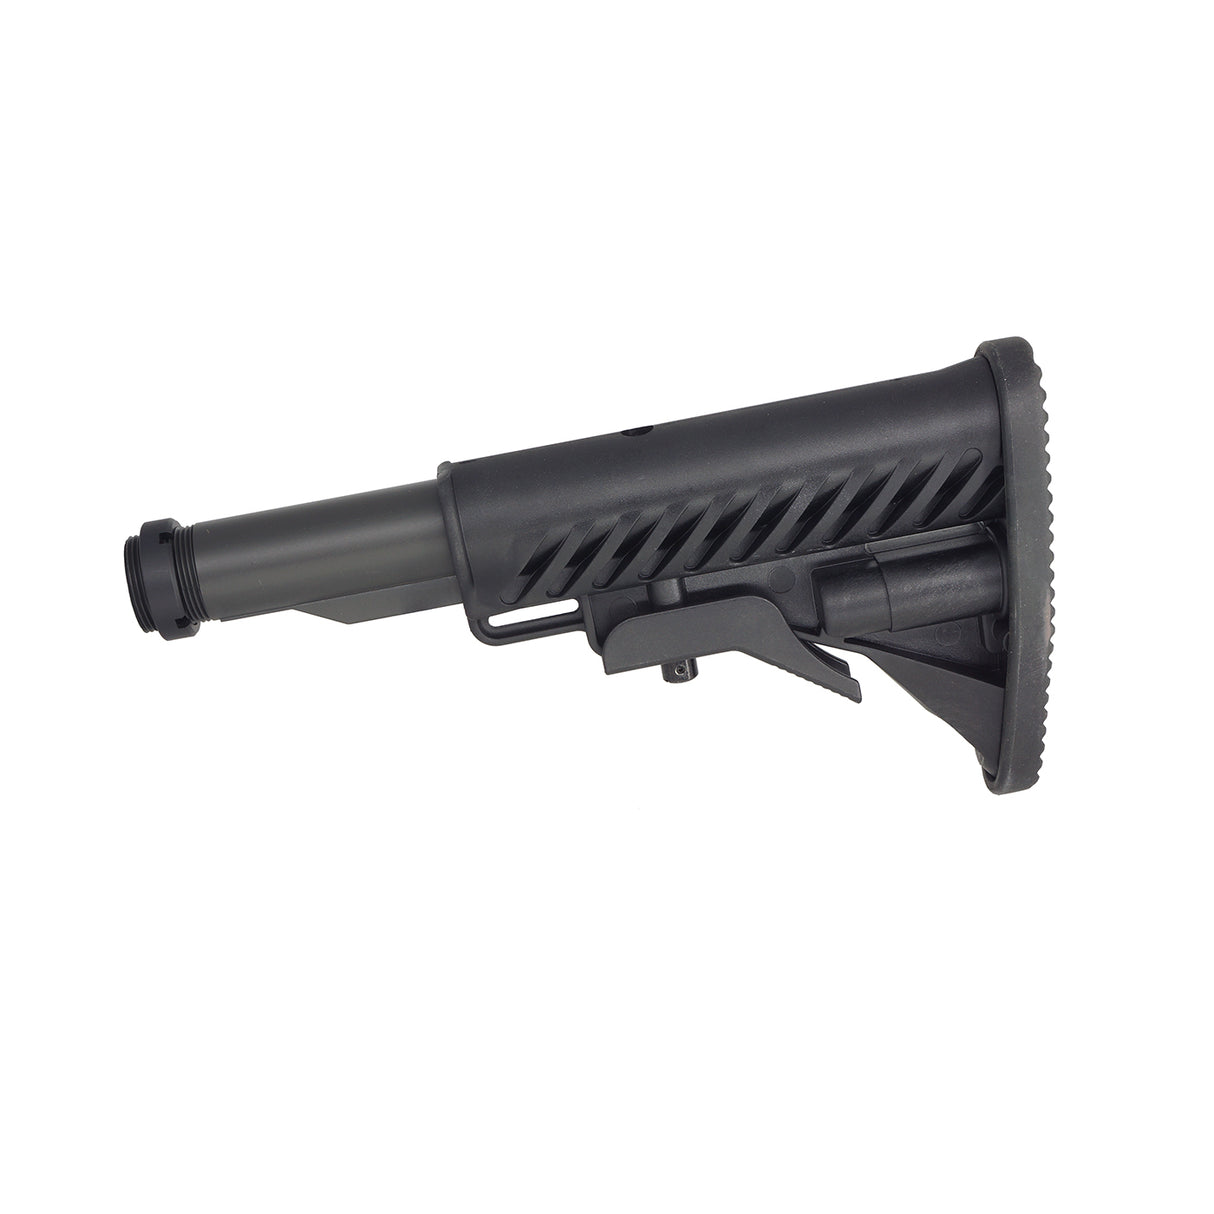 CYMA SIG556 Style Retractable Stock with Tube for M4 AEG ( CYMA-M003 )